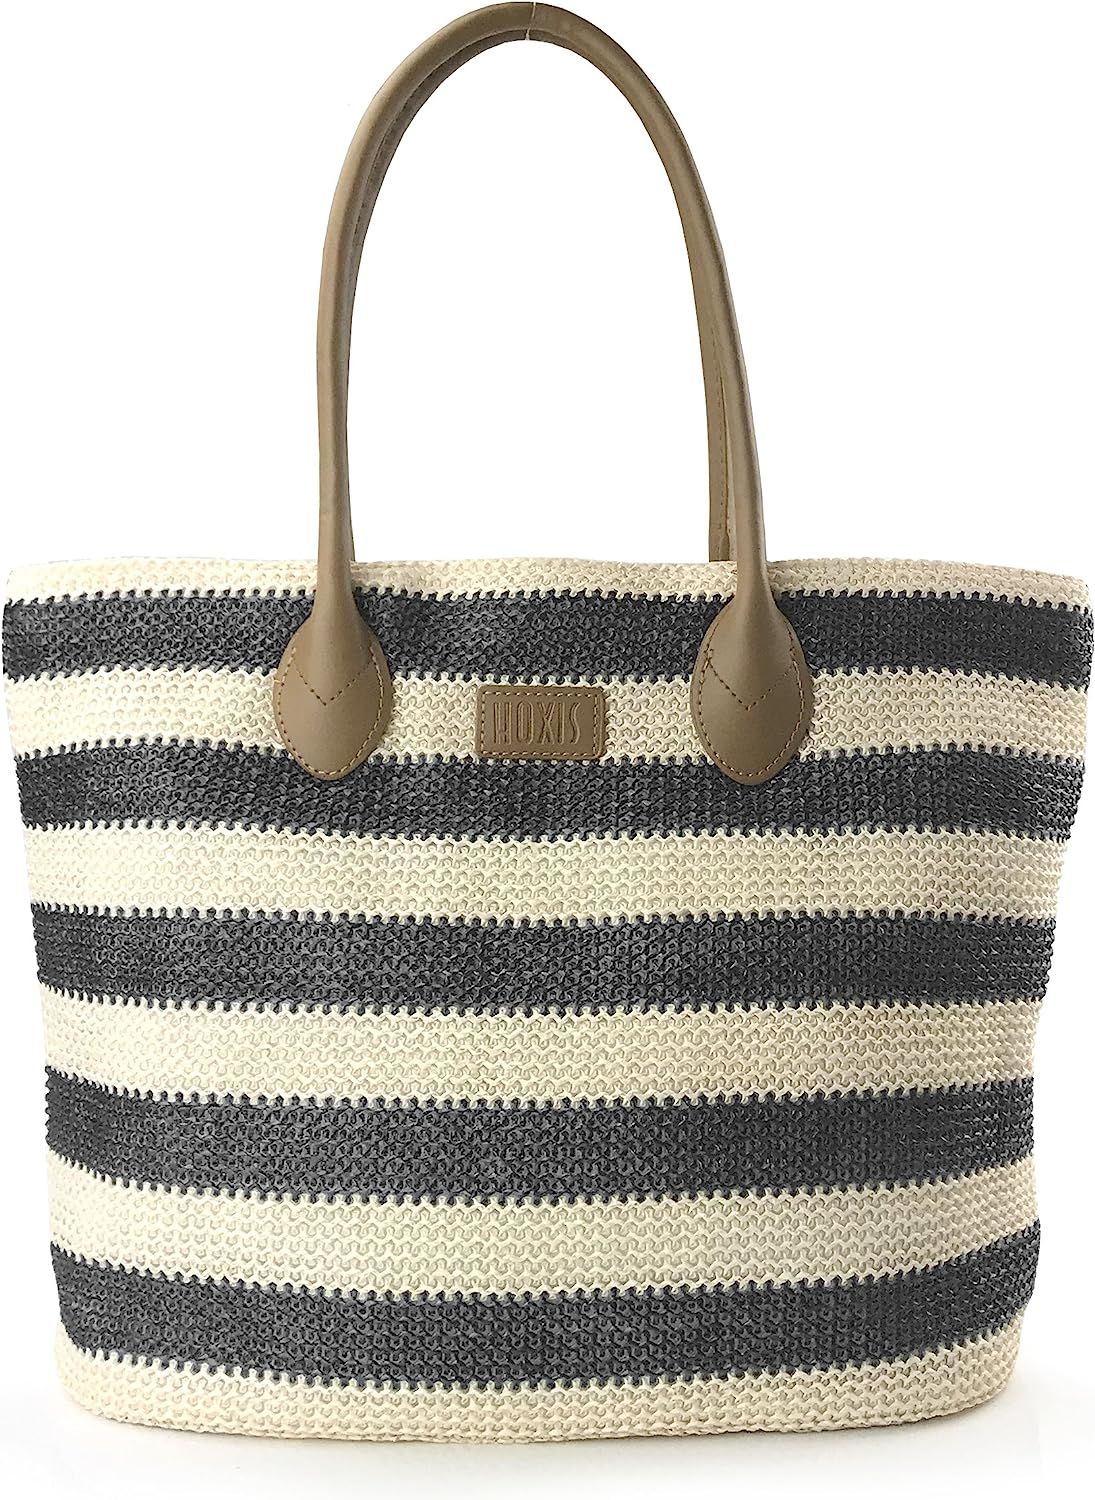 Striped Synthetic Straw Women's Tote Light Weight Vaction Shoulder Handbag | Amazon (US)